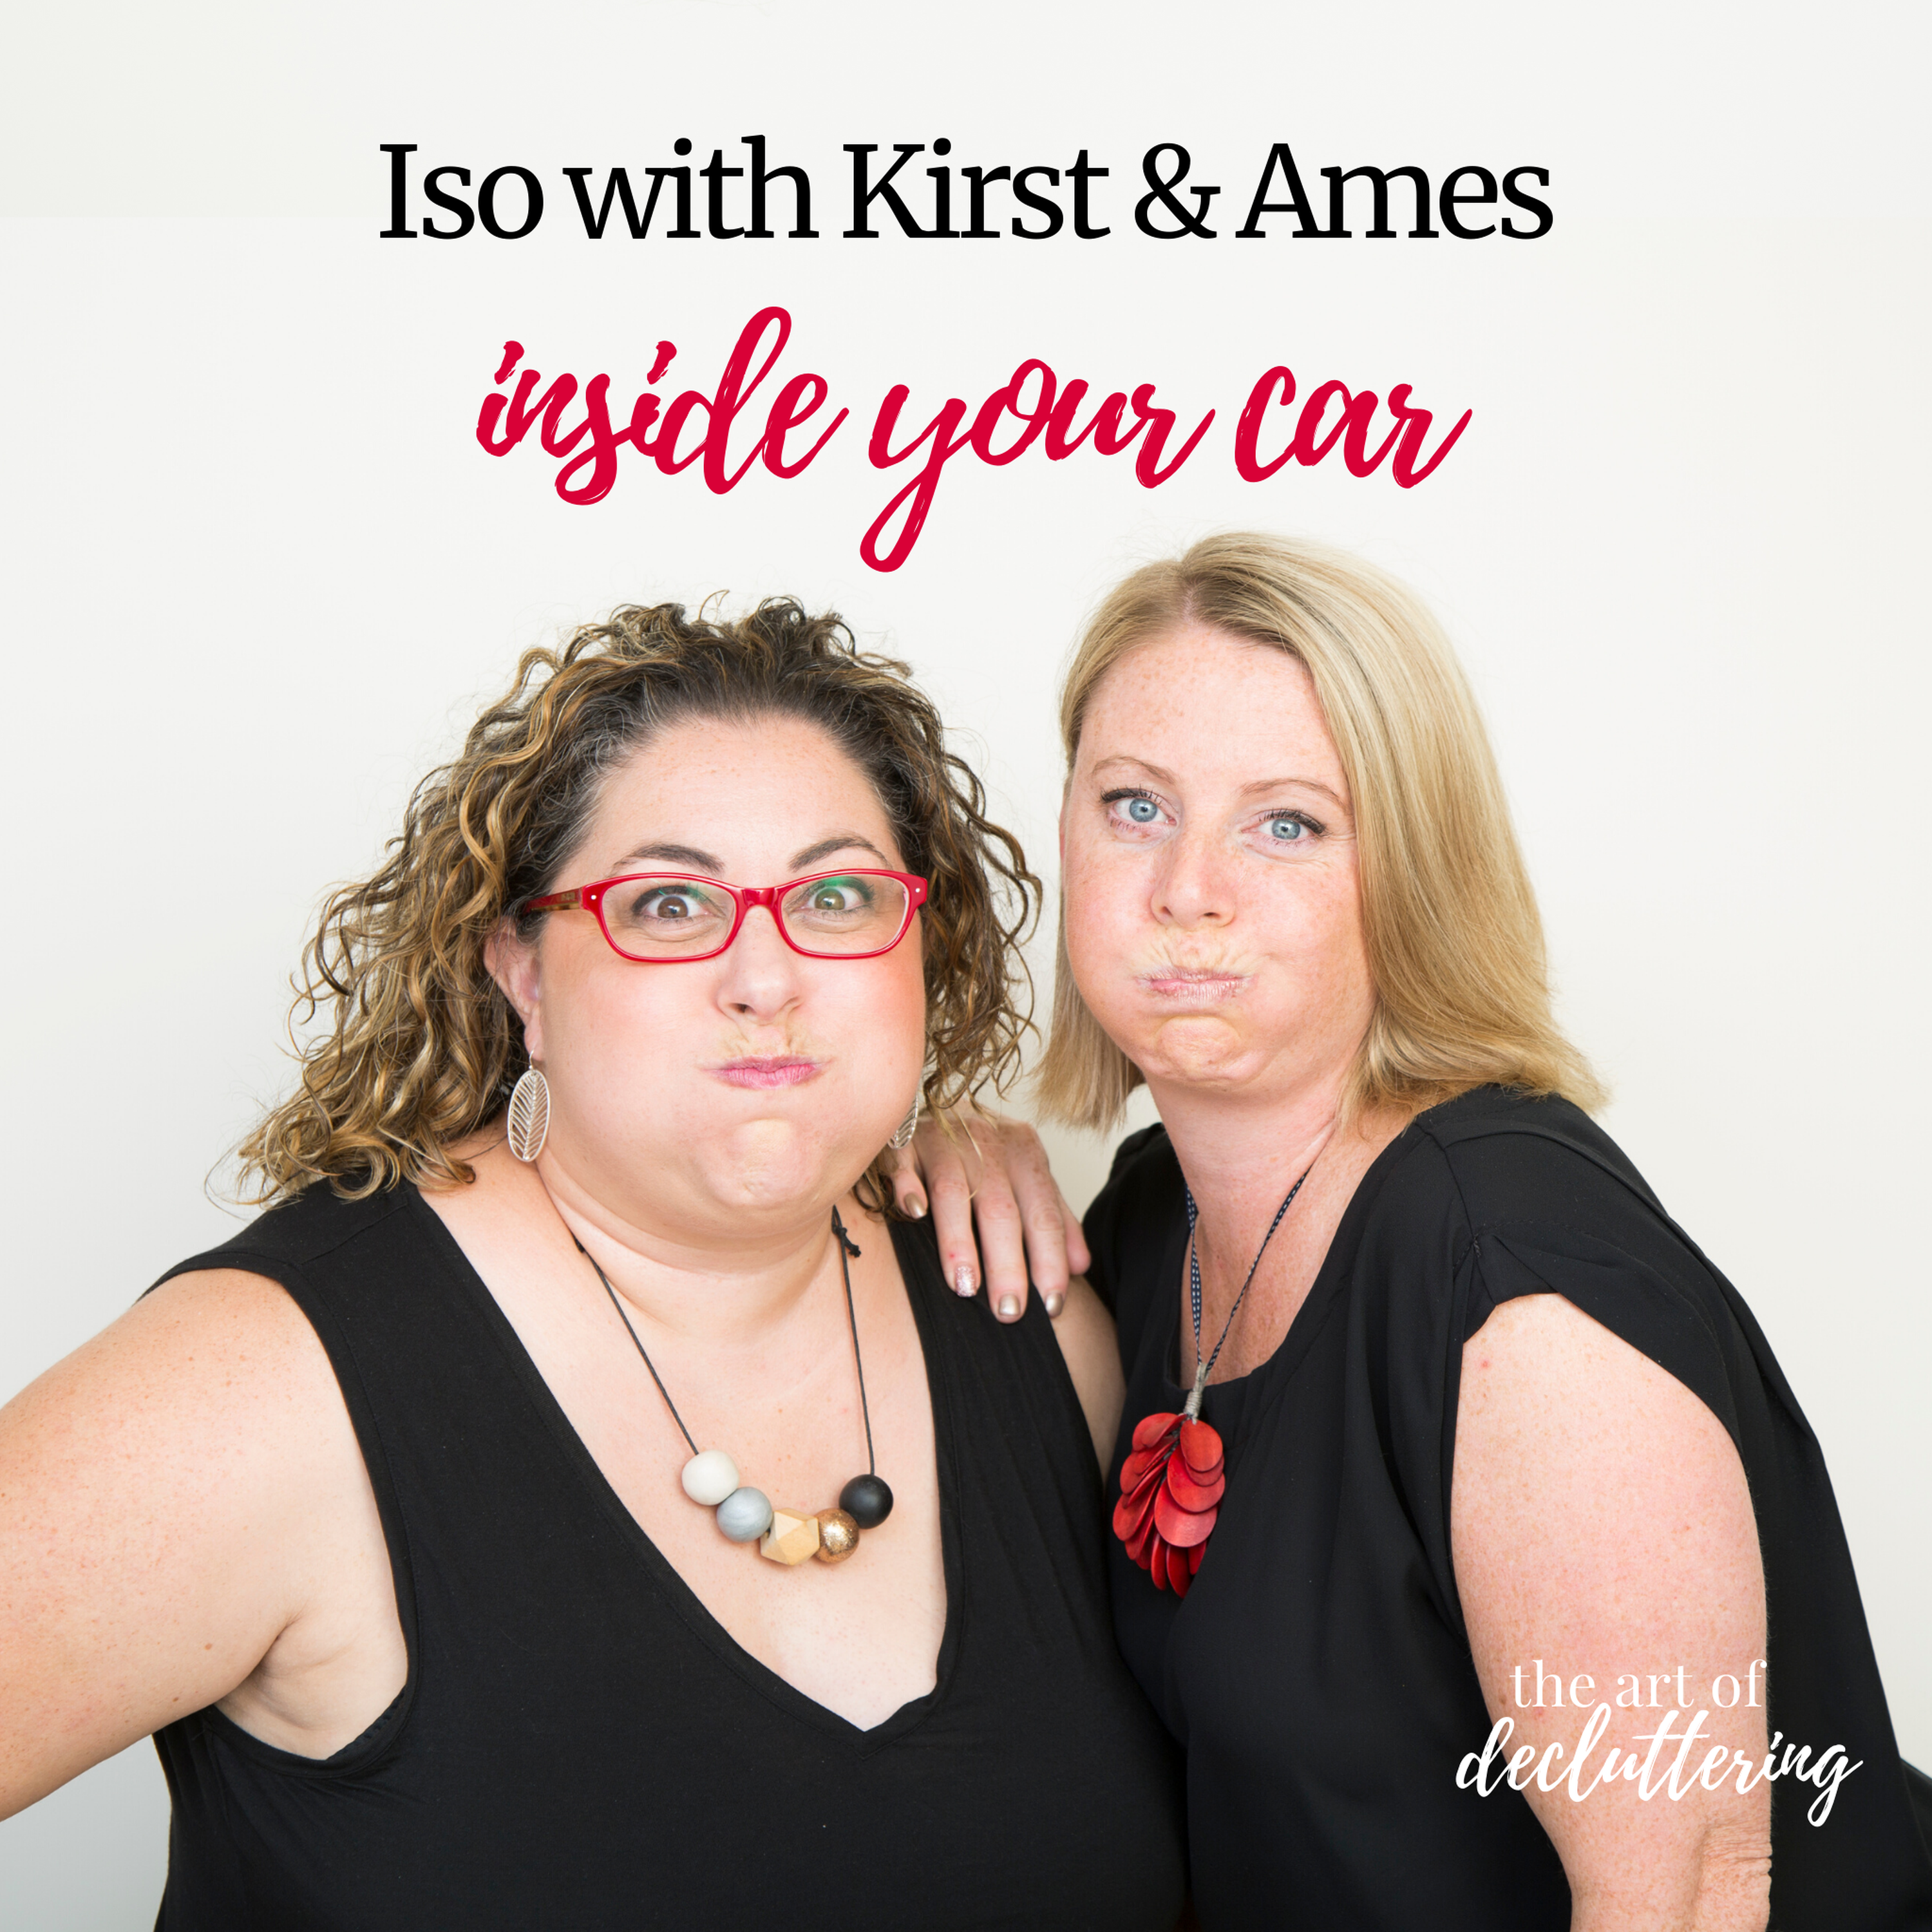 Iso with Kirst & Ames - Inside Your Car